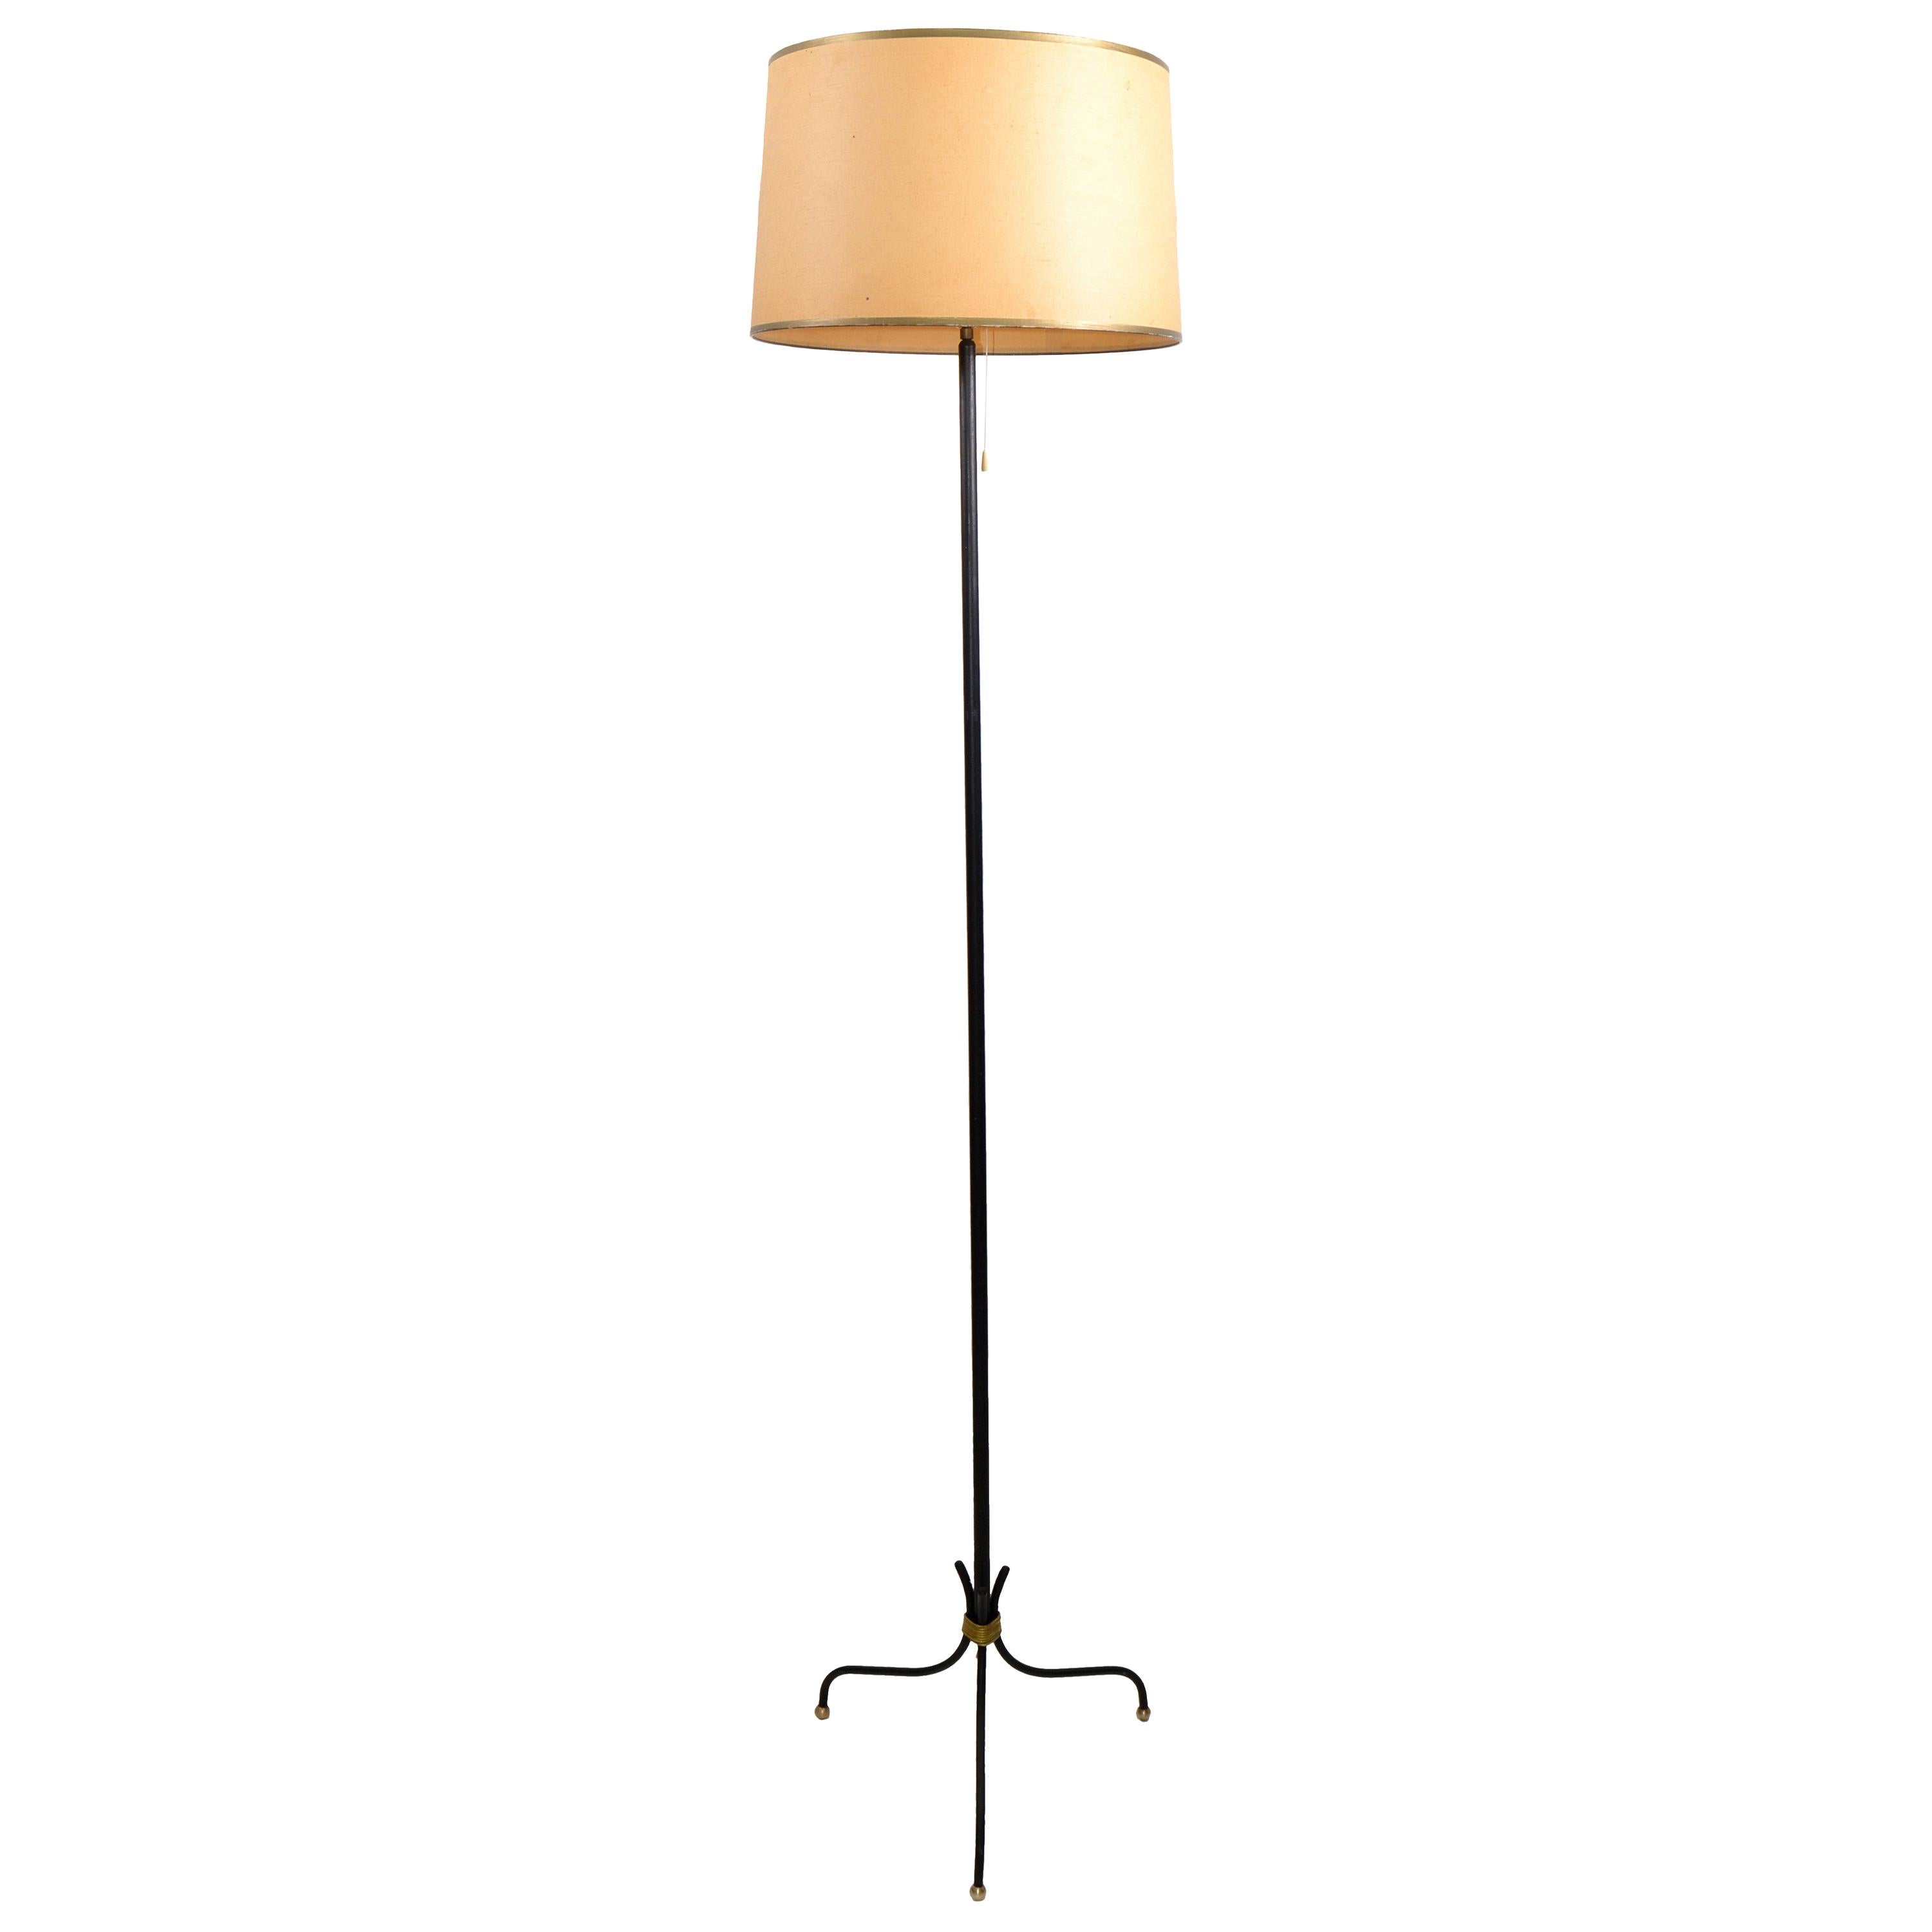 Pierre Guariche Style French Mid-Century Modern Wrought Iron & Brass Floor Lamp